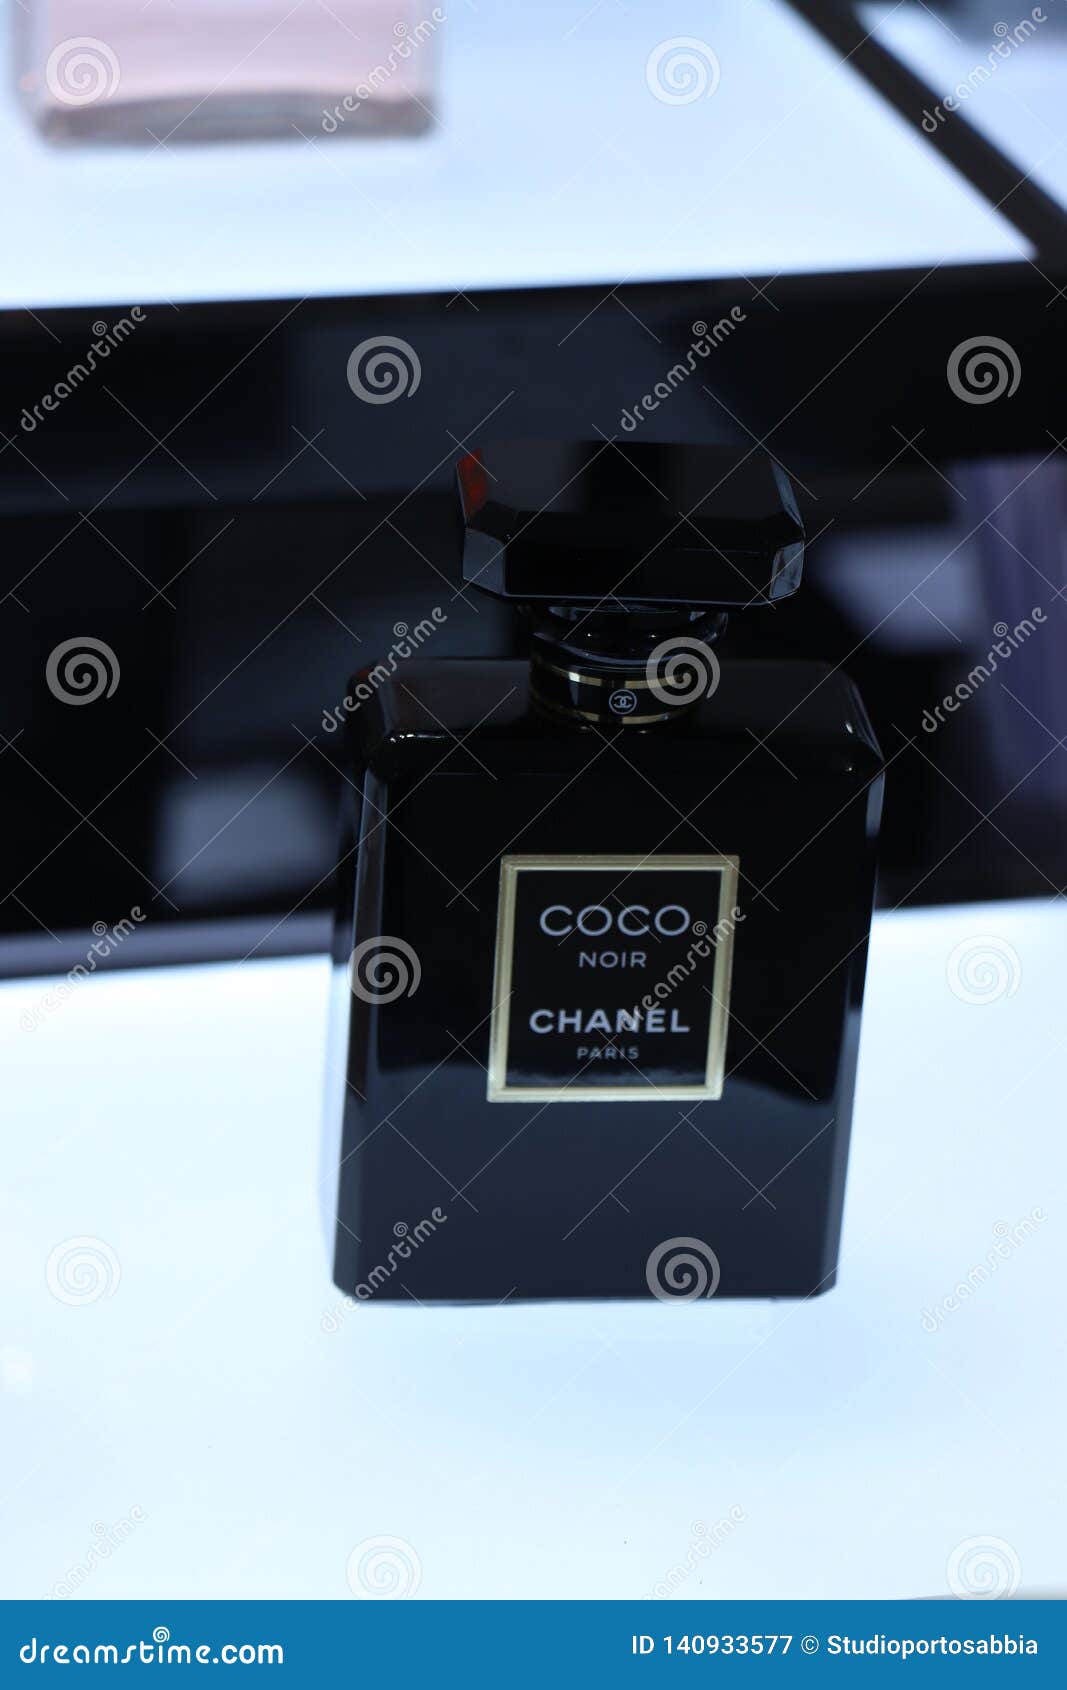 261 Coco Chanel Perfume Photos Free Royalty Free Stock Photos From Dreamstime